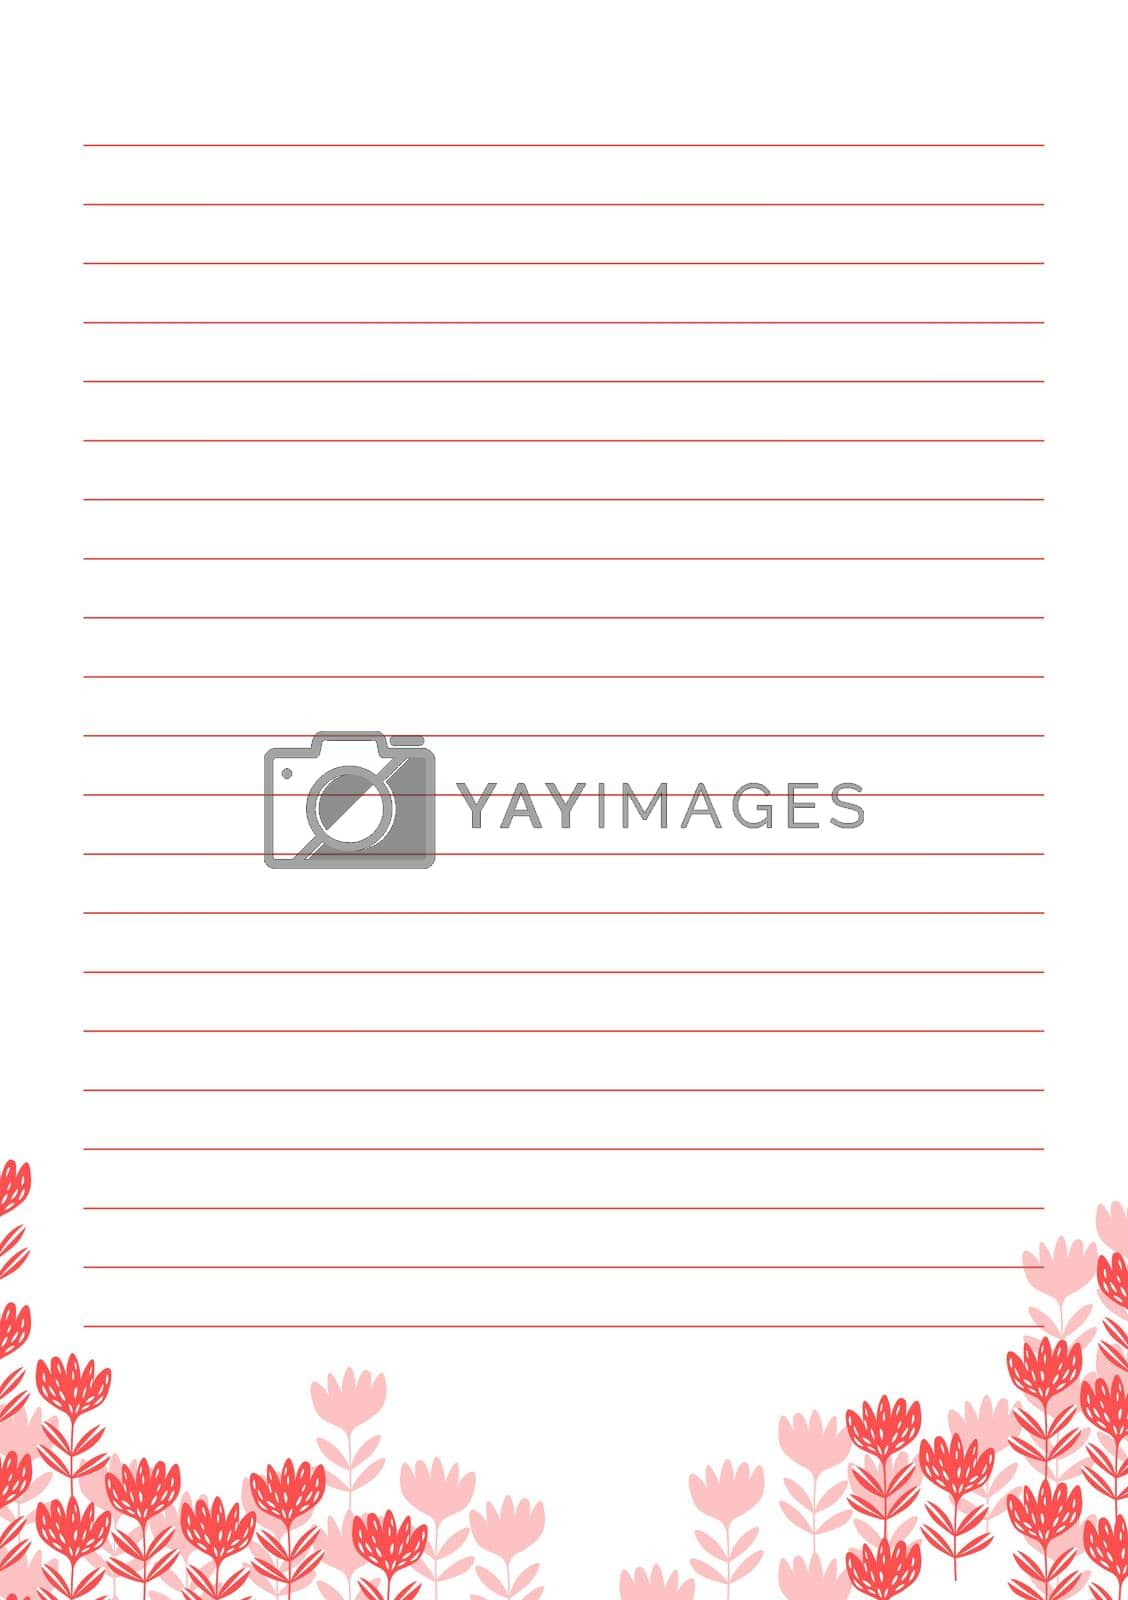 Royalty free image of Grid paper. Abstract striped background with color horizontal lines. Printing paper note on floral background. Optimal A5 size. Geometric pattern for school, copybooks, notebooks, diary, notes, books. by allaku